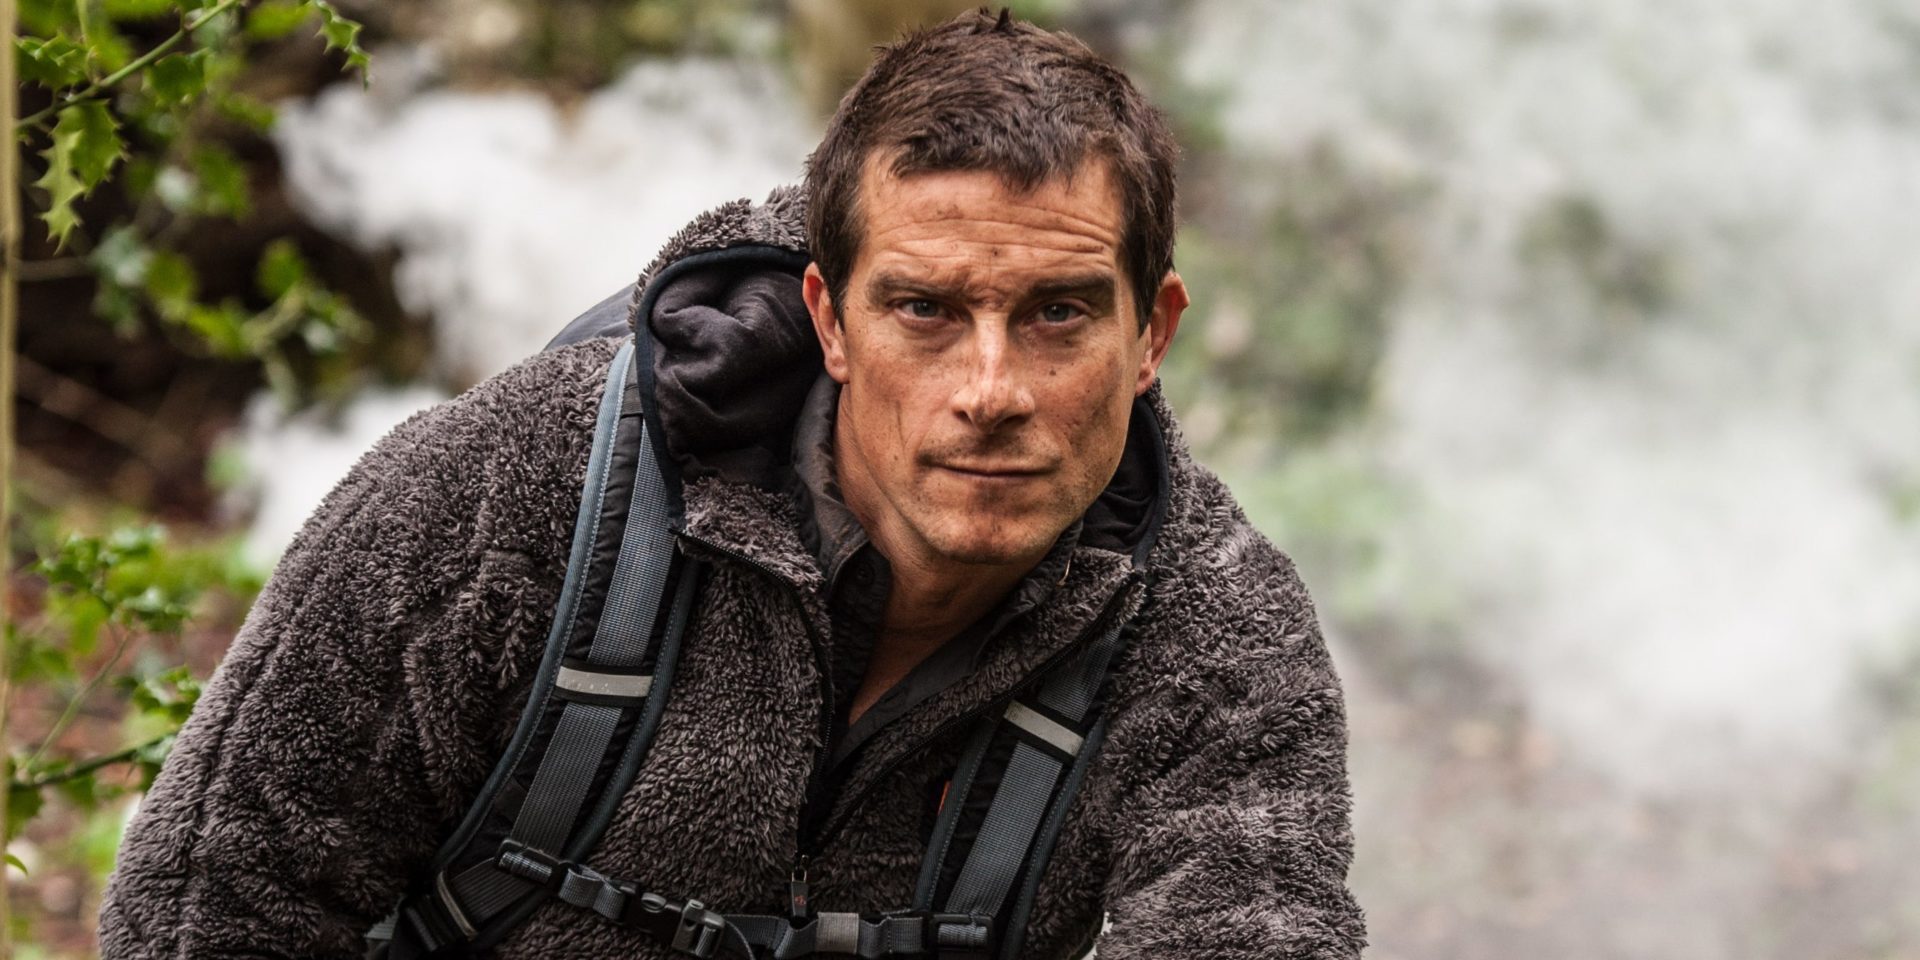 Bear Grylls' 10 memorable moments in a life of adventure The Sunday Post